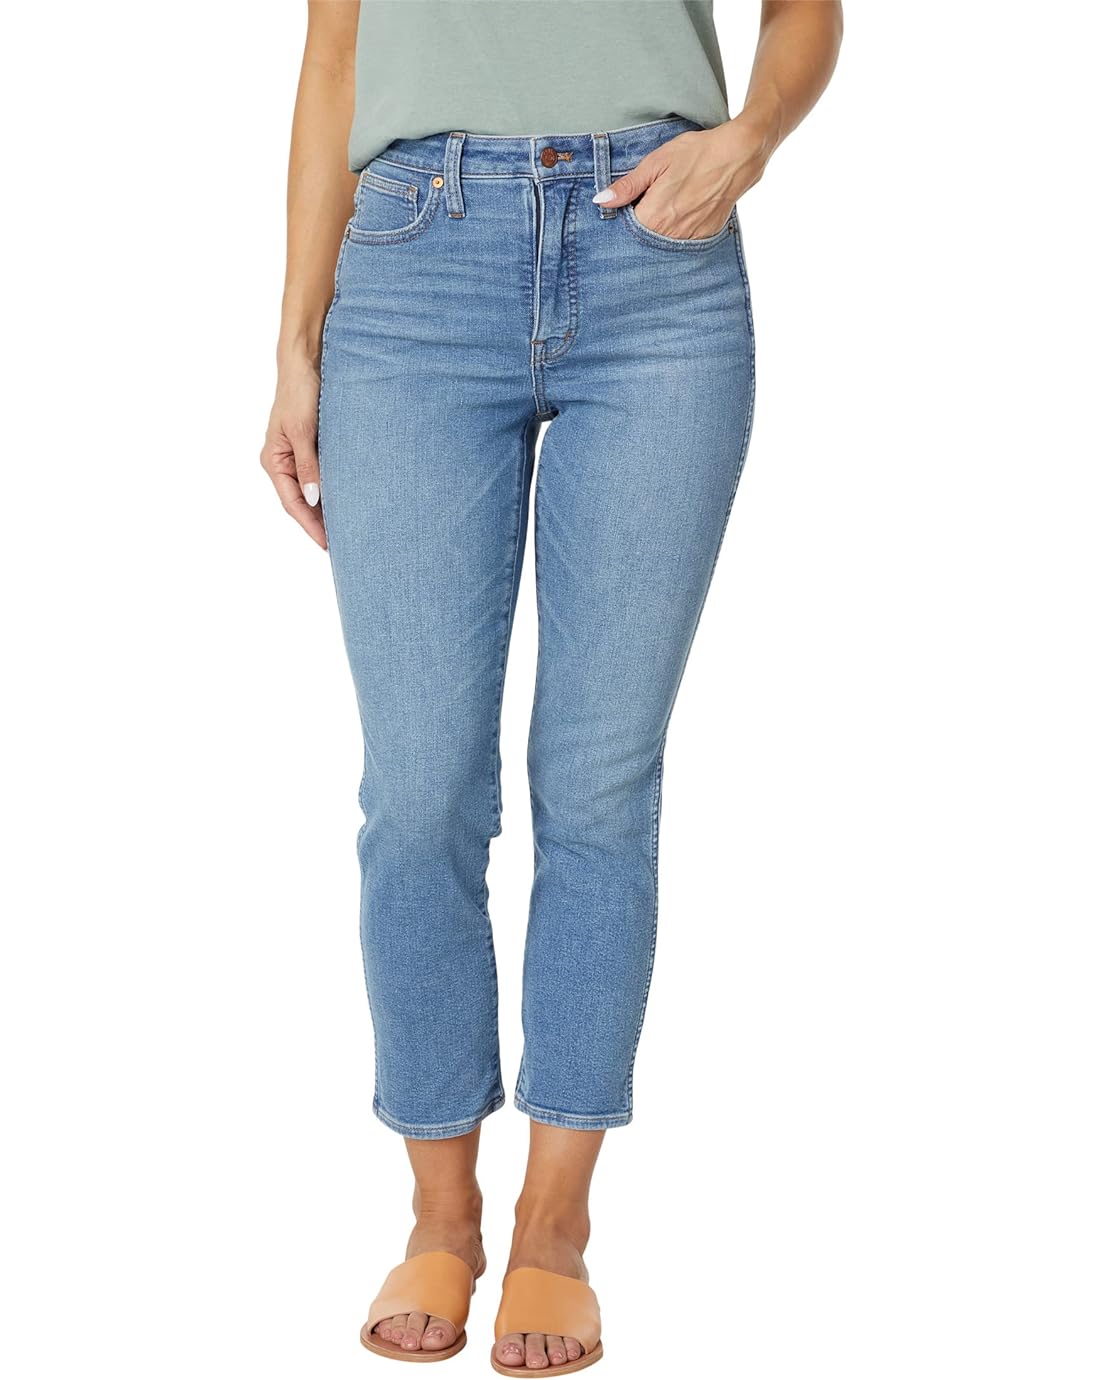 Madewell Curvy Stovepipe Jeans in Euclid Wash